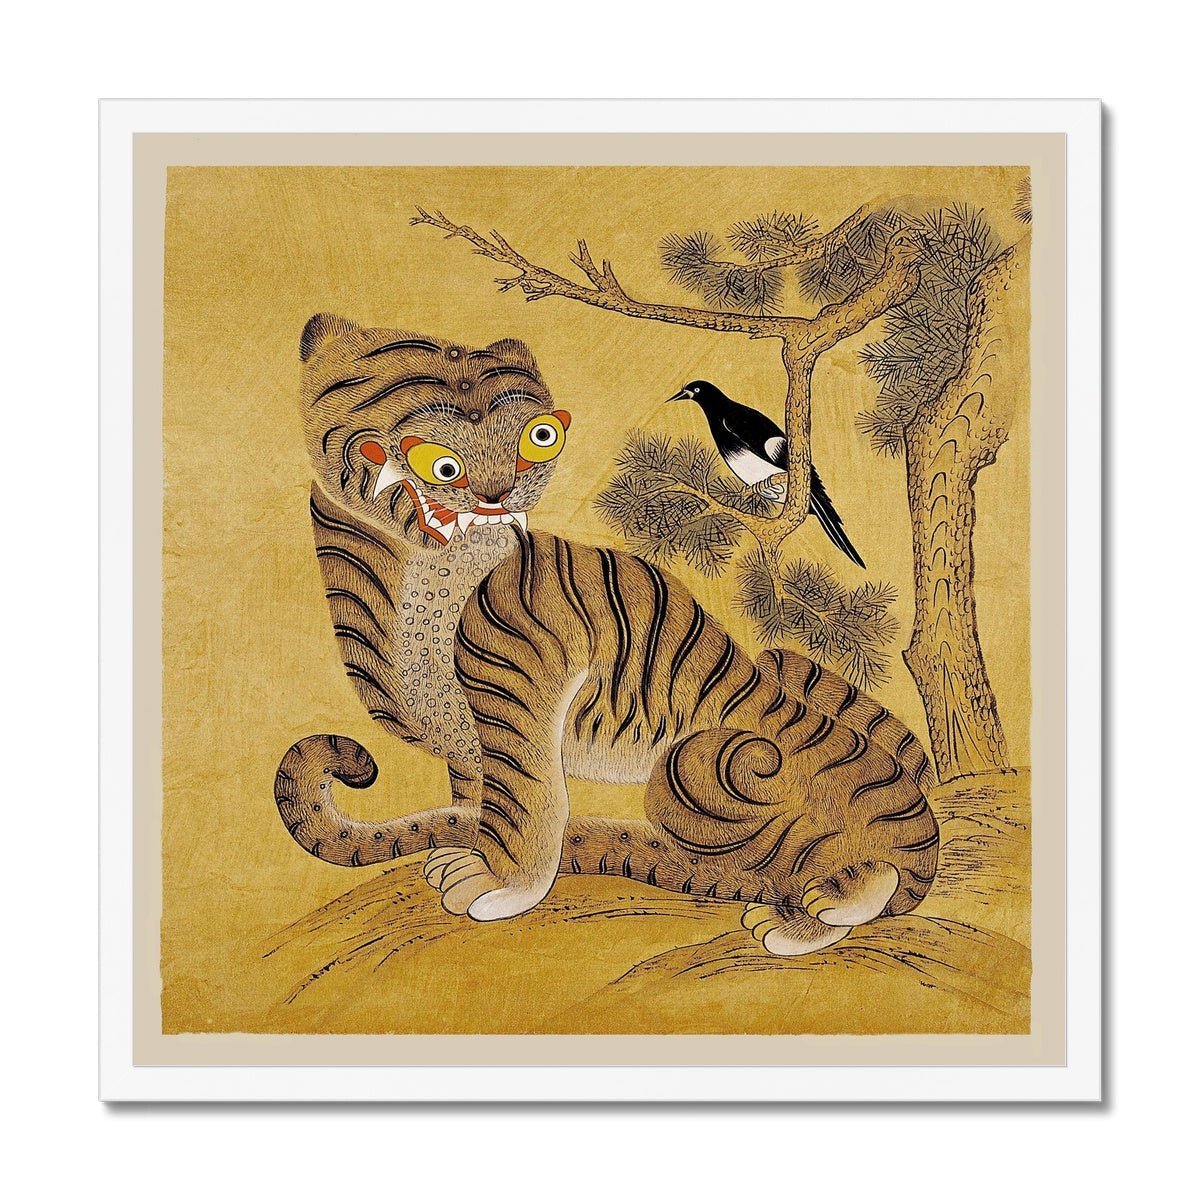 Framed Print 12"x12" / White Frame Freaky Tiger and Magpie: Korean 19th-Century Minhwa Folk Painting | Vintage Bird Cute Funny Kawaii Gift | Lion Leopard Poster Framed Print